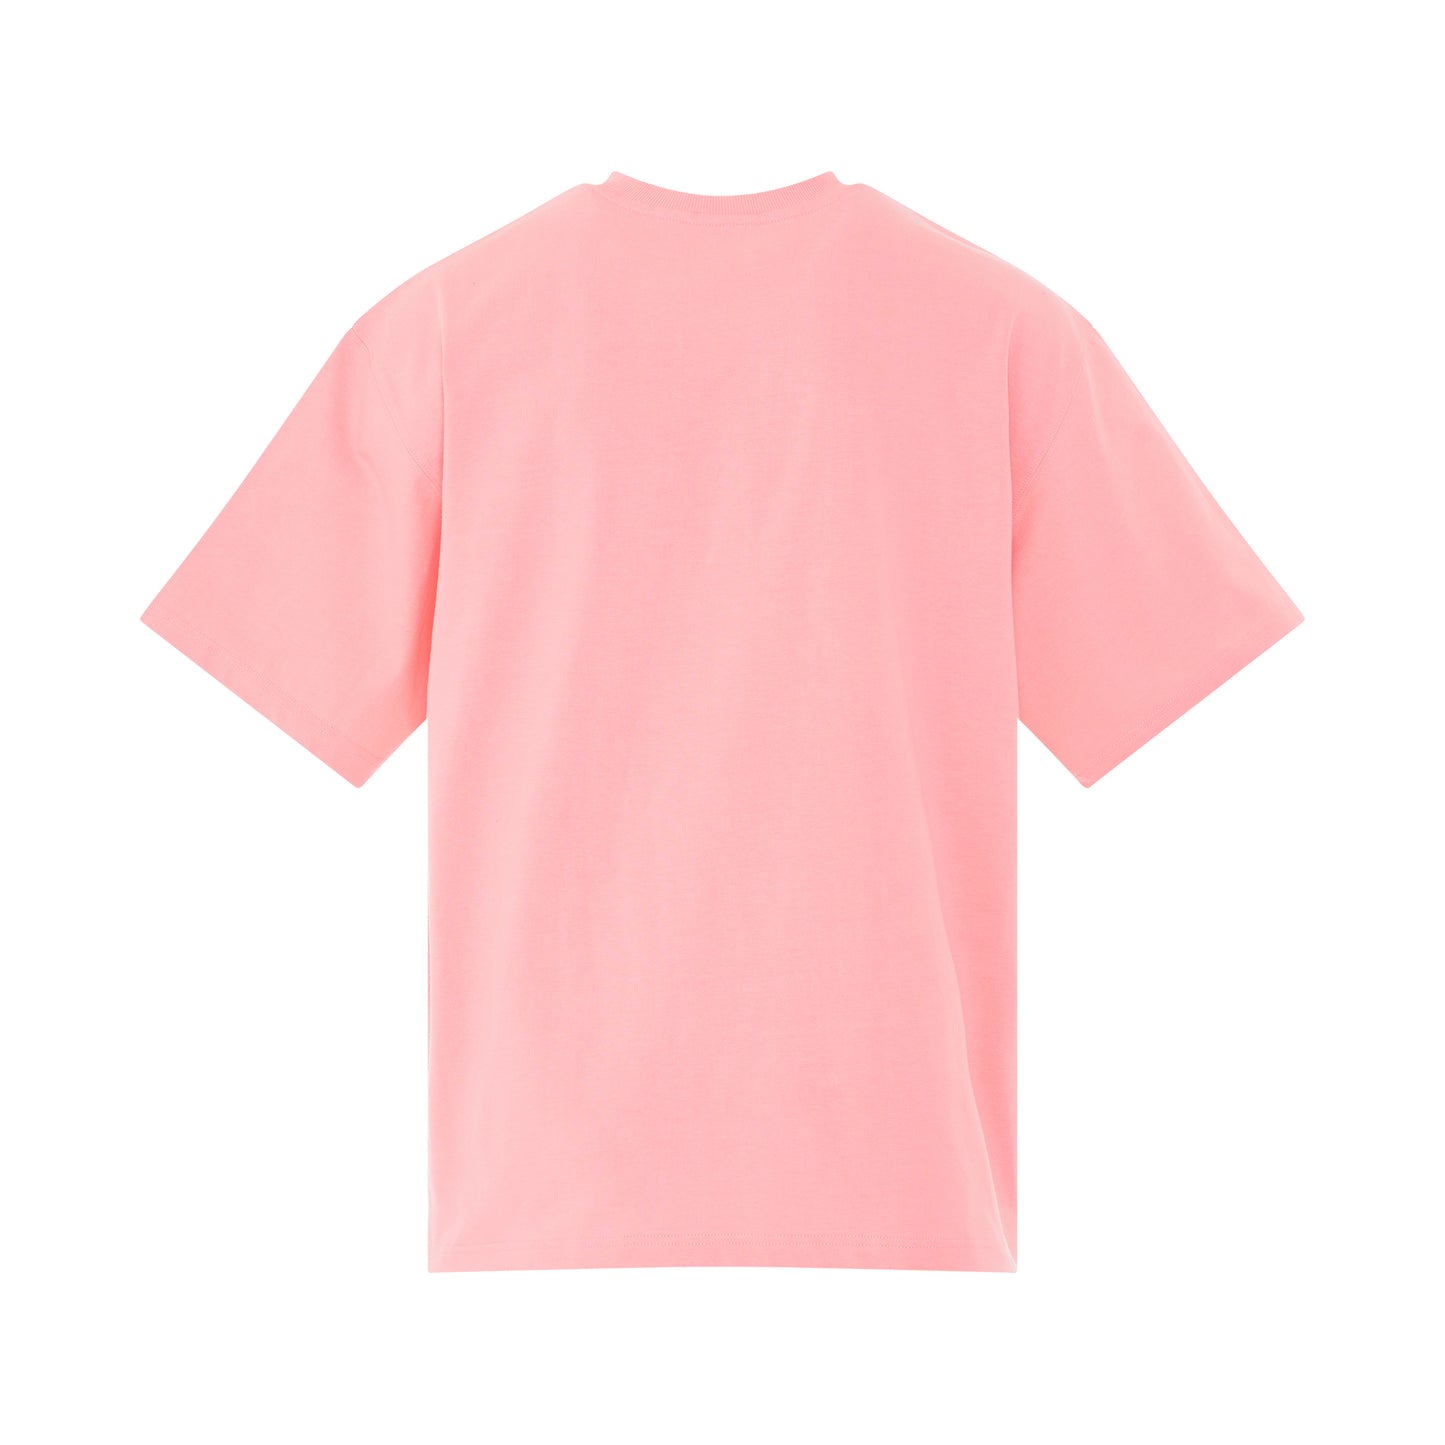 Patched Mirror Logo T-Shirt in Pink